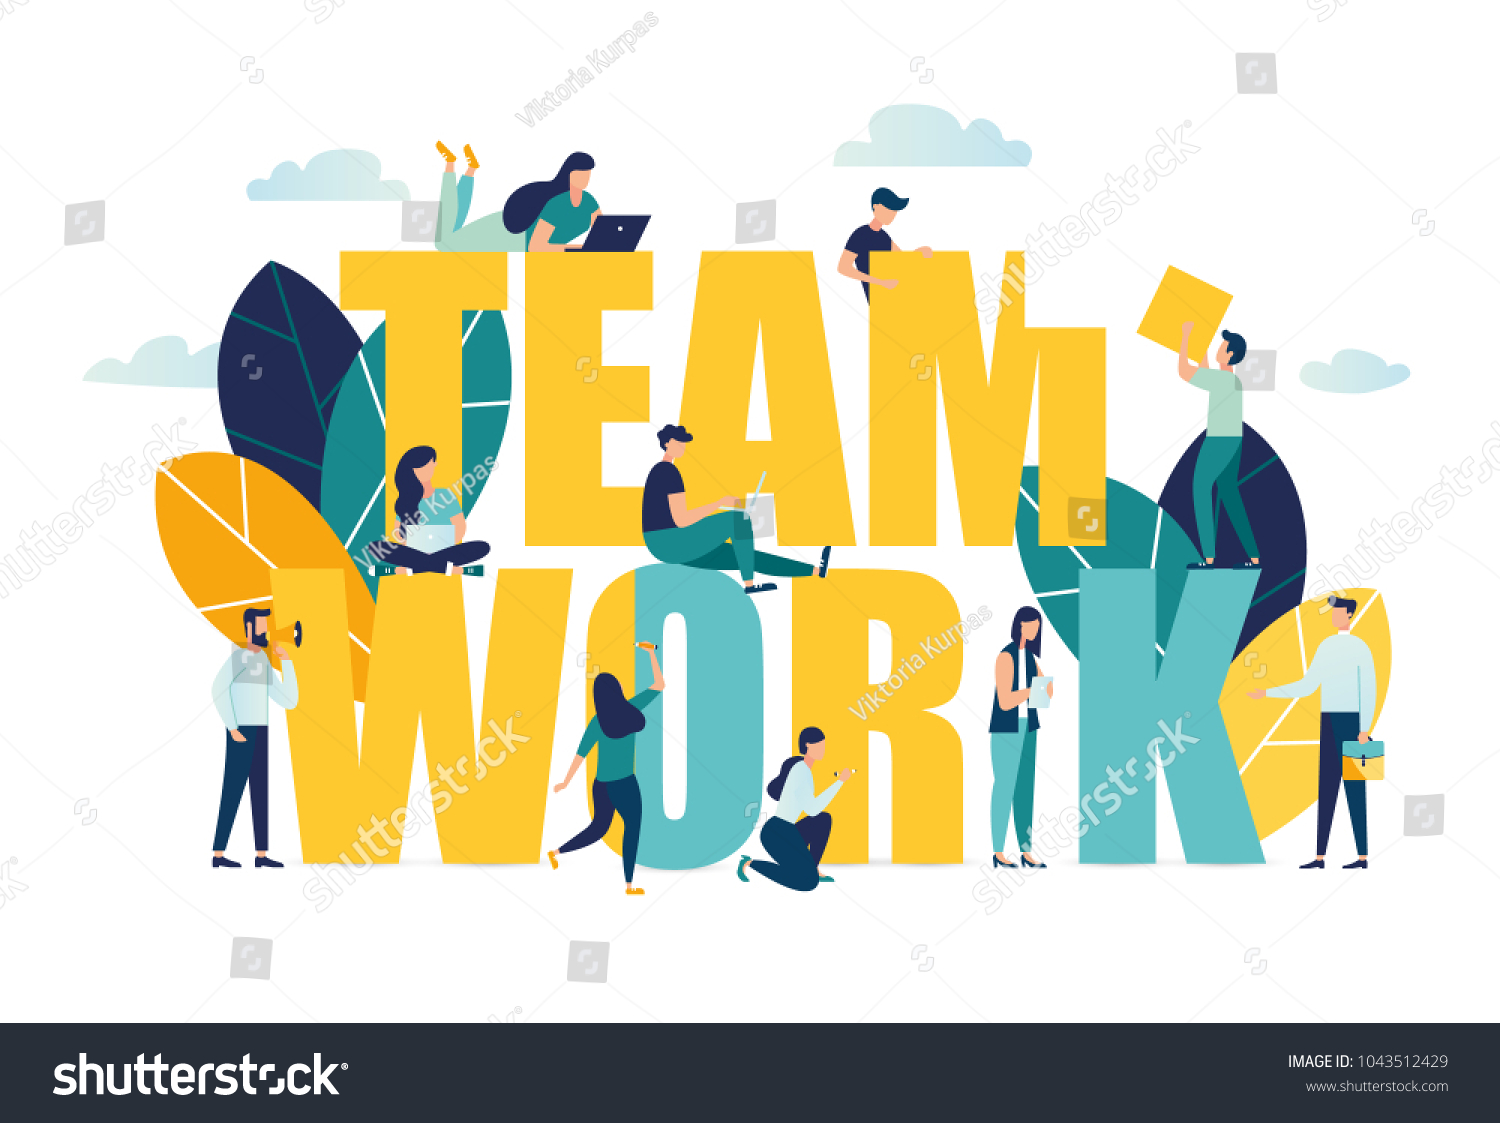 Vector business illustration, businessmen together build word teamwork, abstract design graphic, construction business project vector #1043512429